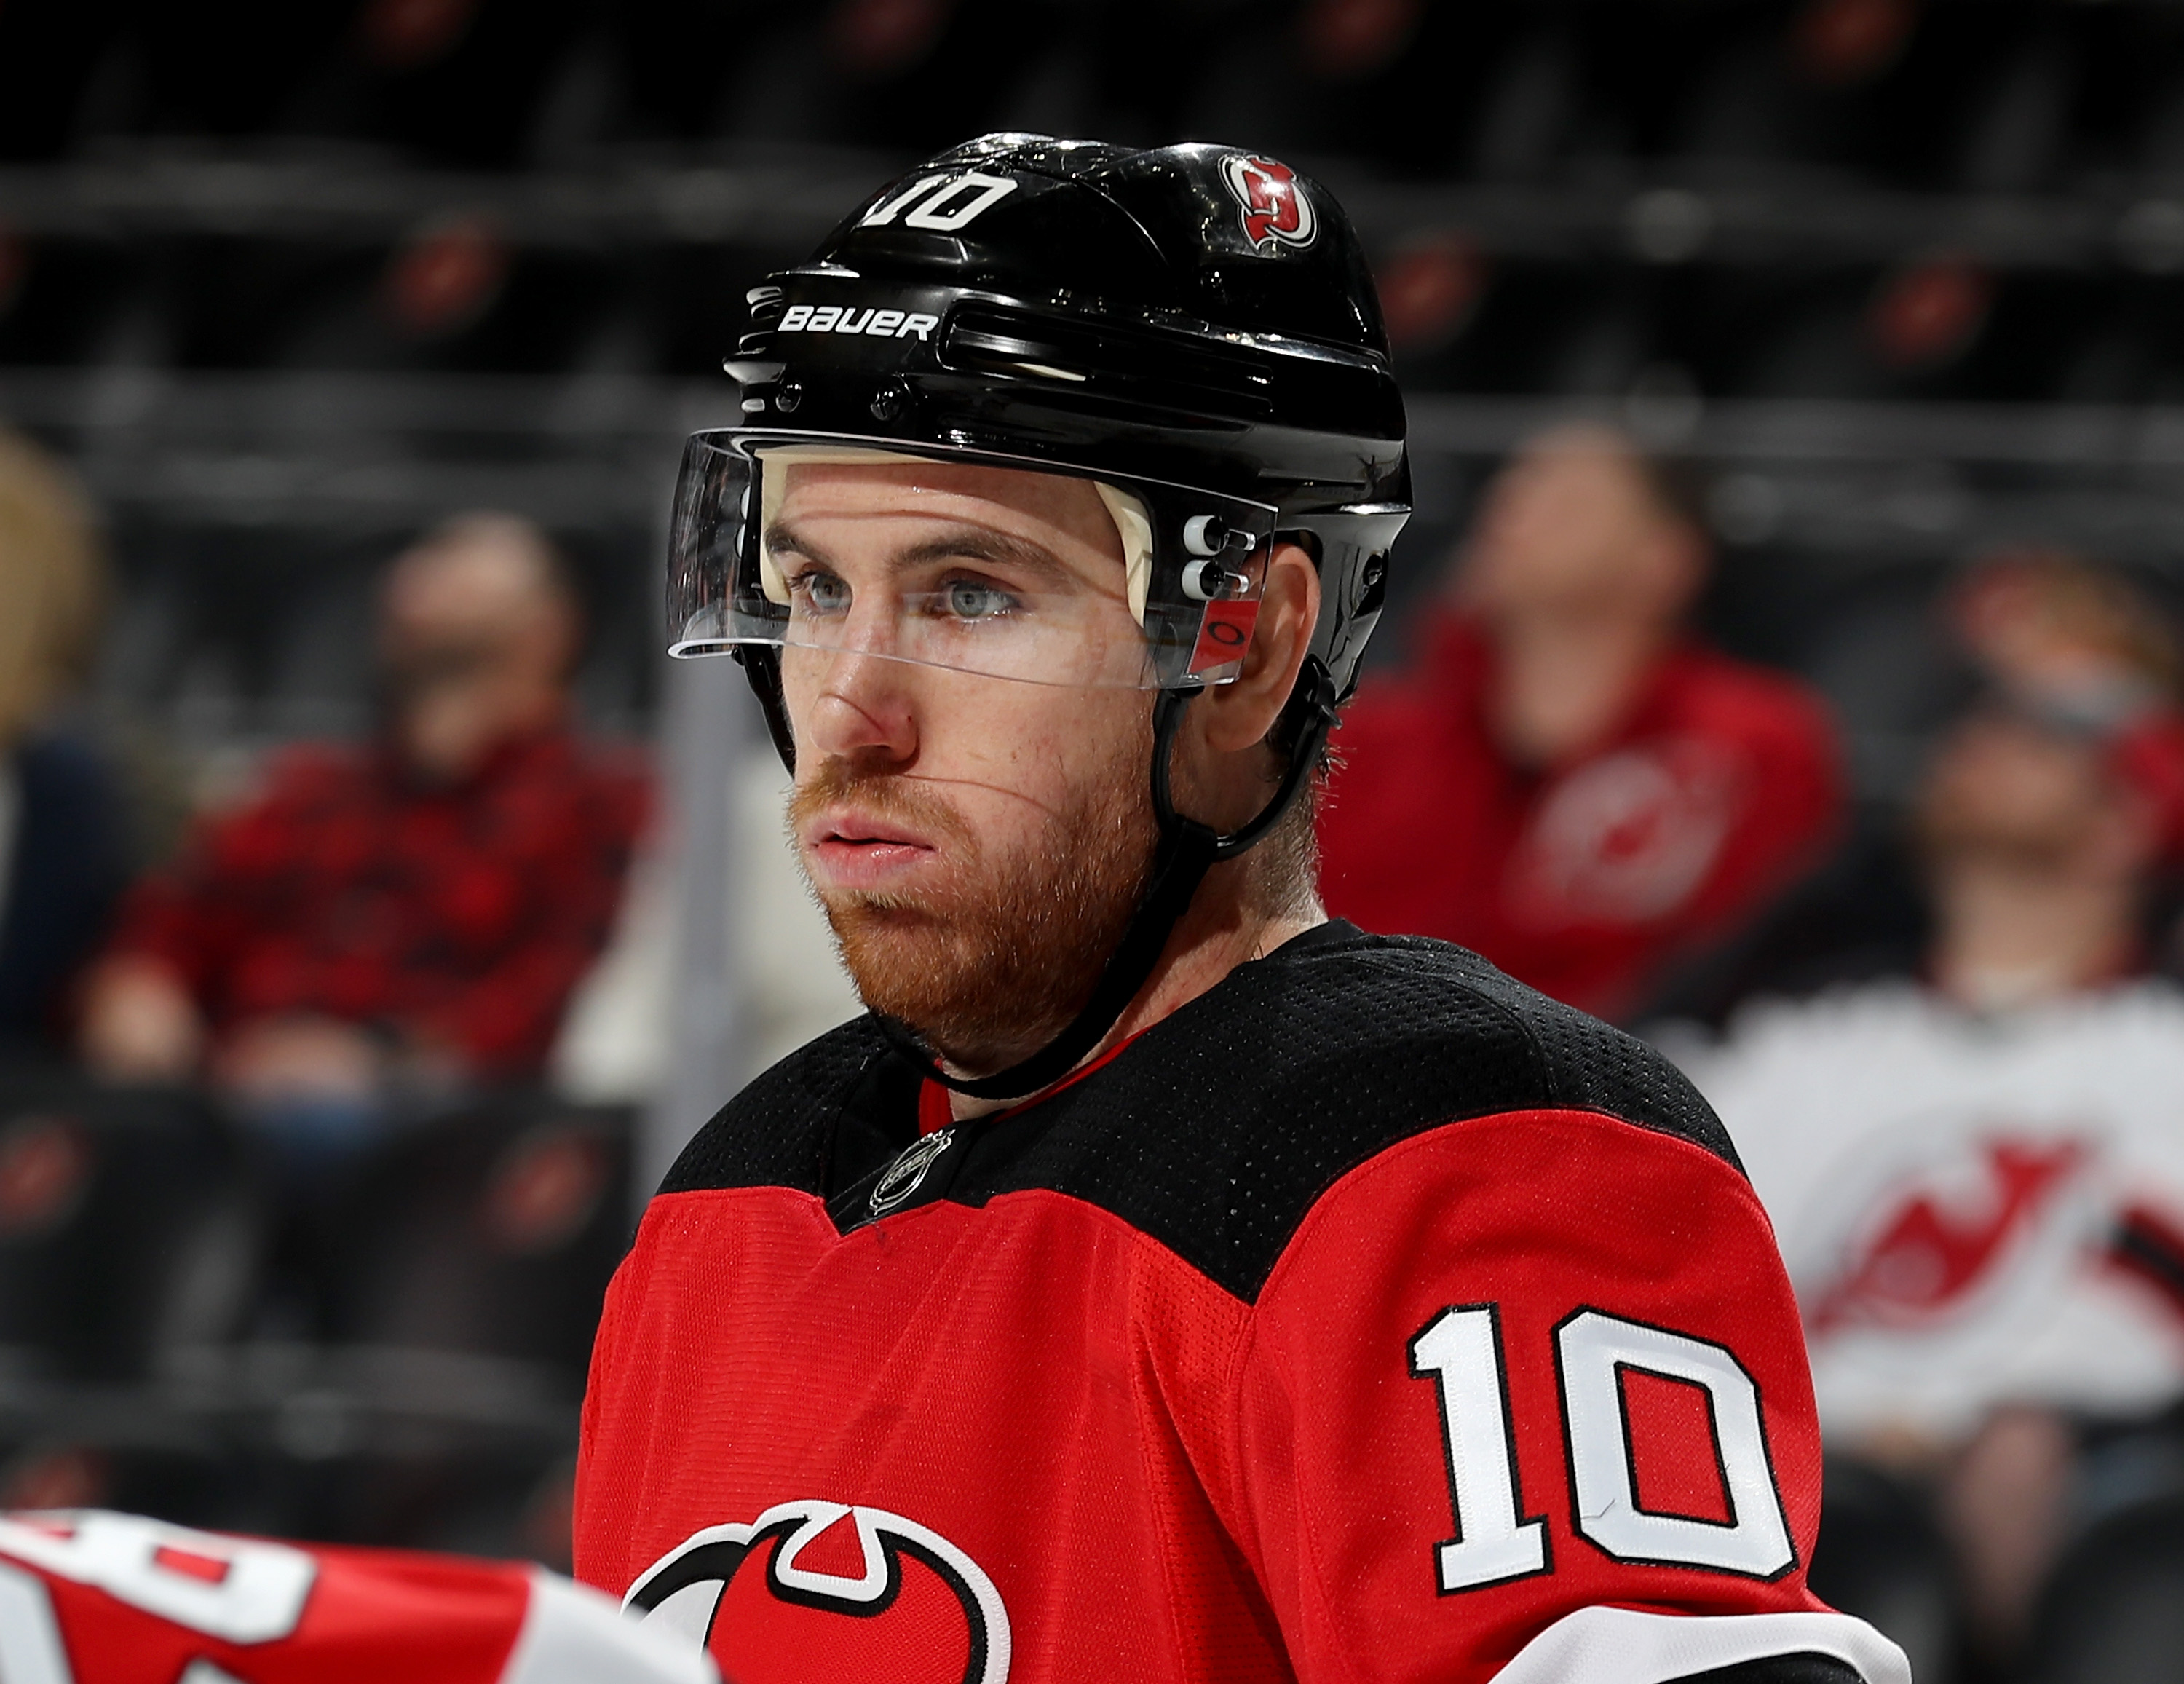 2 Reasons New Devils Jersey Is A Miss And 1 Reasons It's Not So Bad